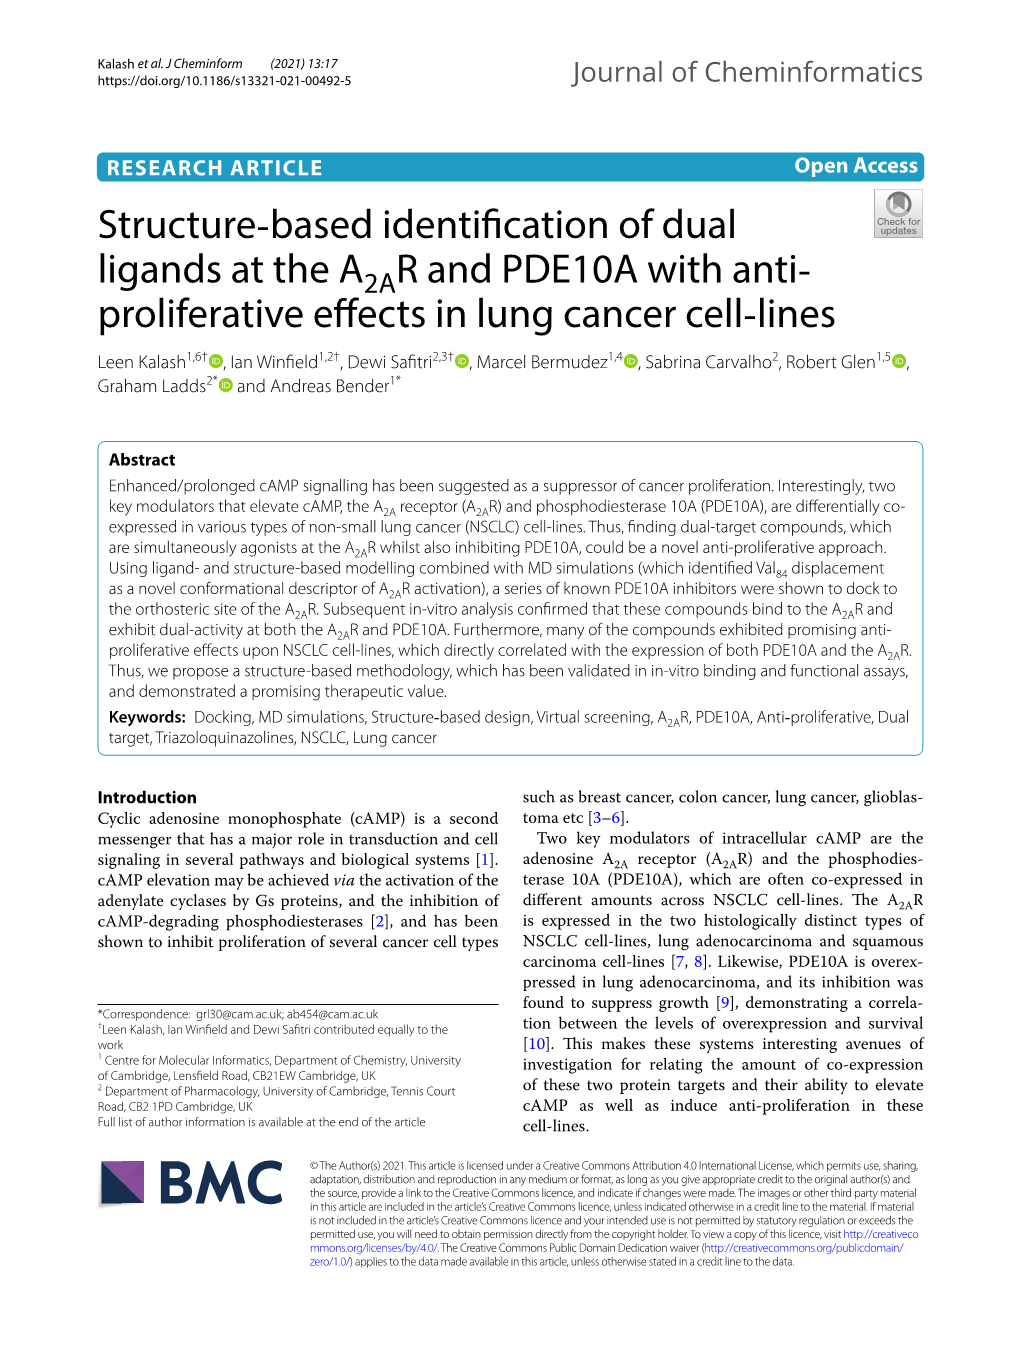 Structure‐Based Identification of Dual Ligands at the A2AR and PDE10A with Anti‐Proliferative Effects in Lung Cancer Cell